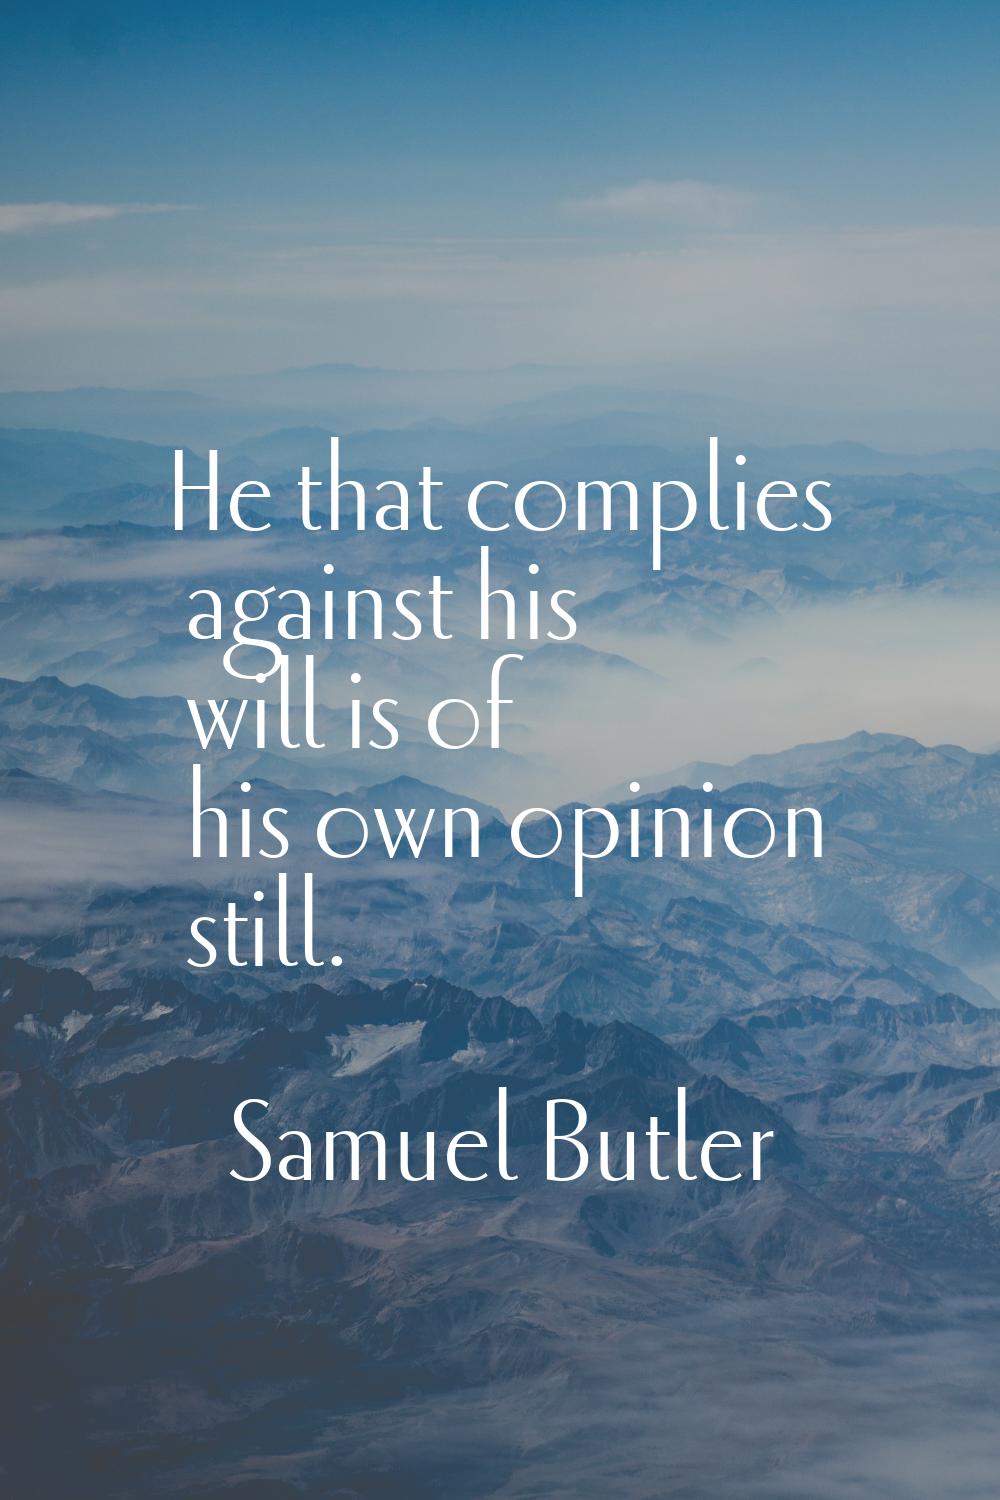 He that complies against his will is of his own opinion still.